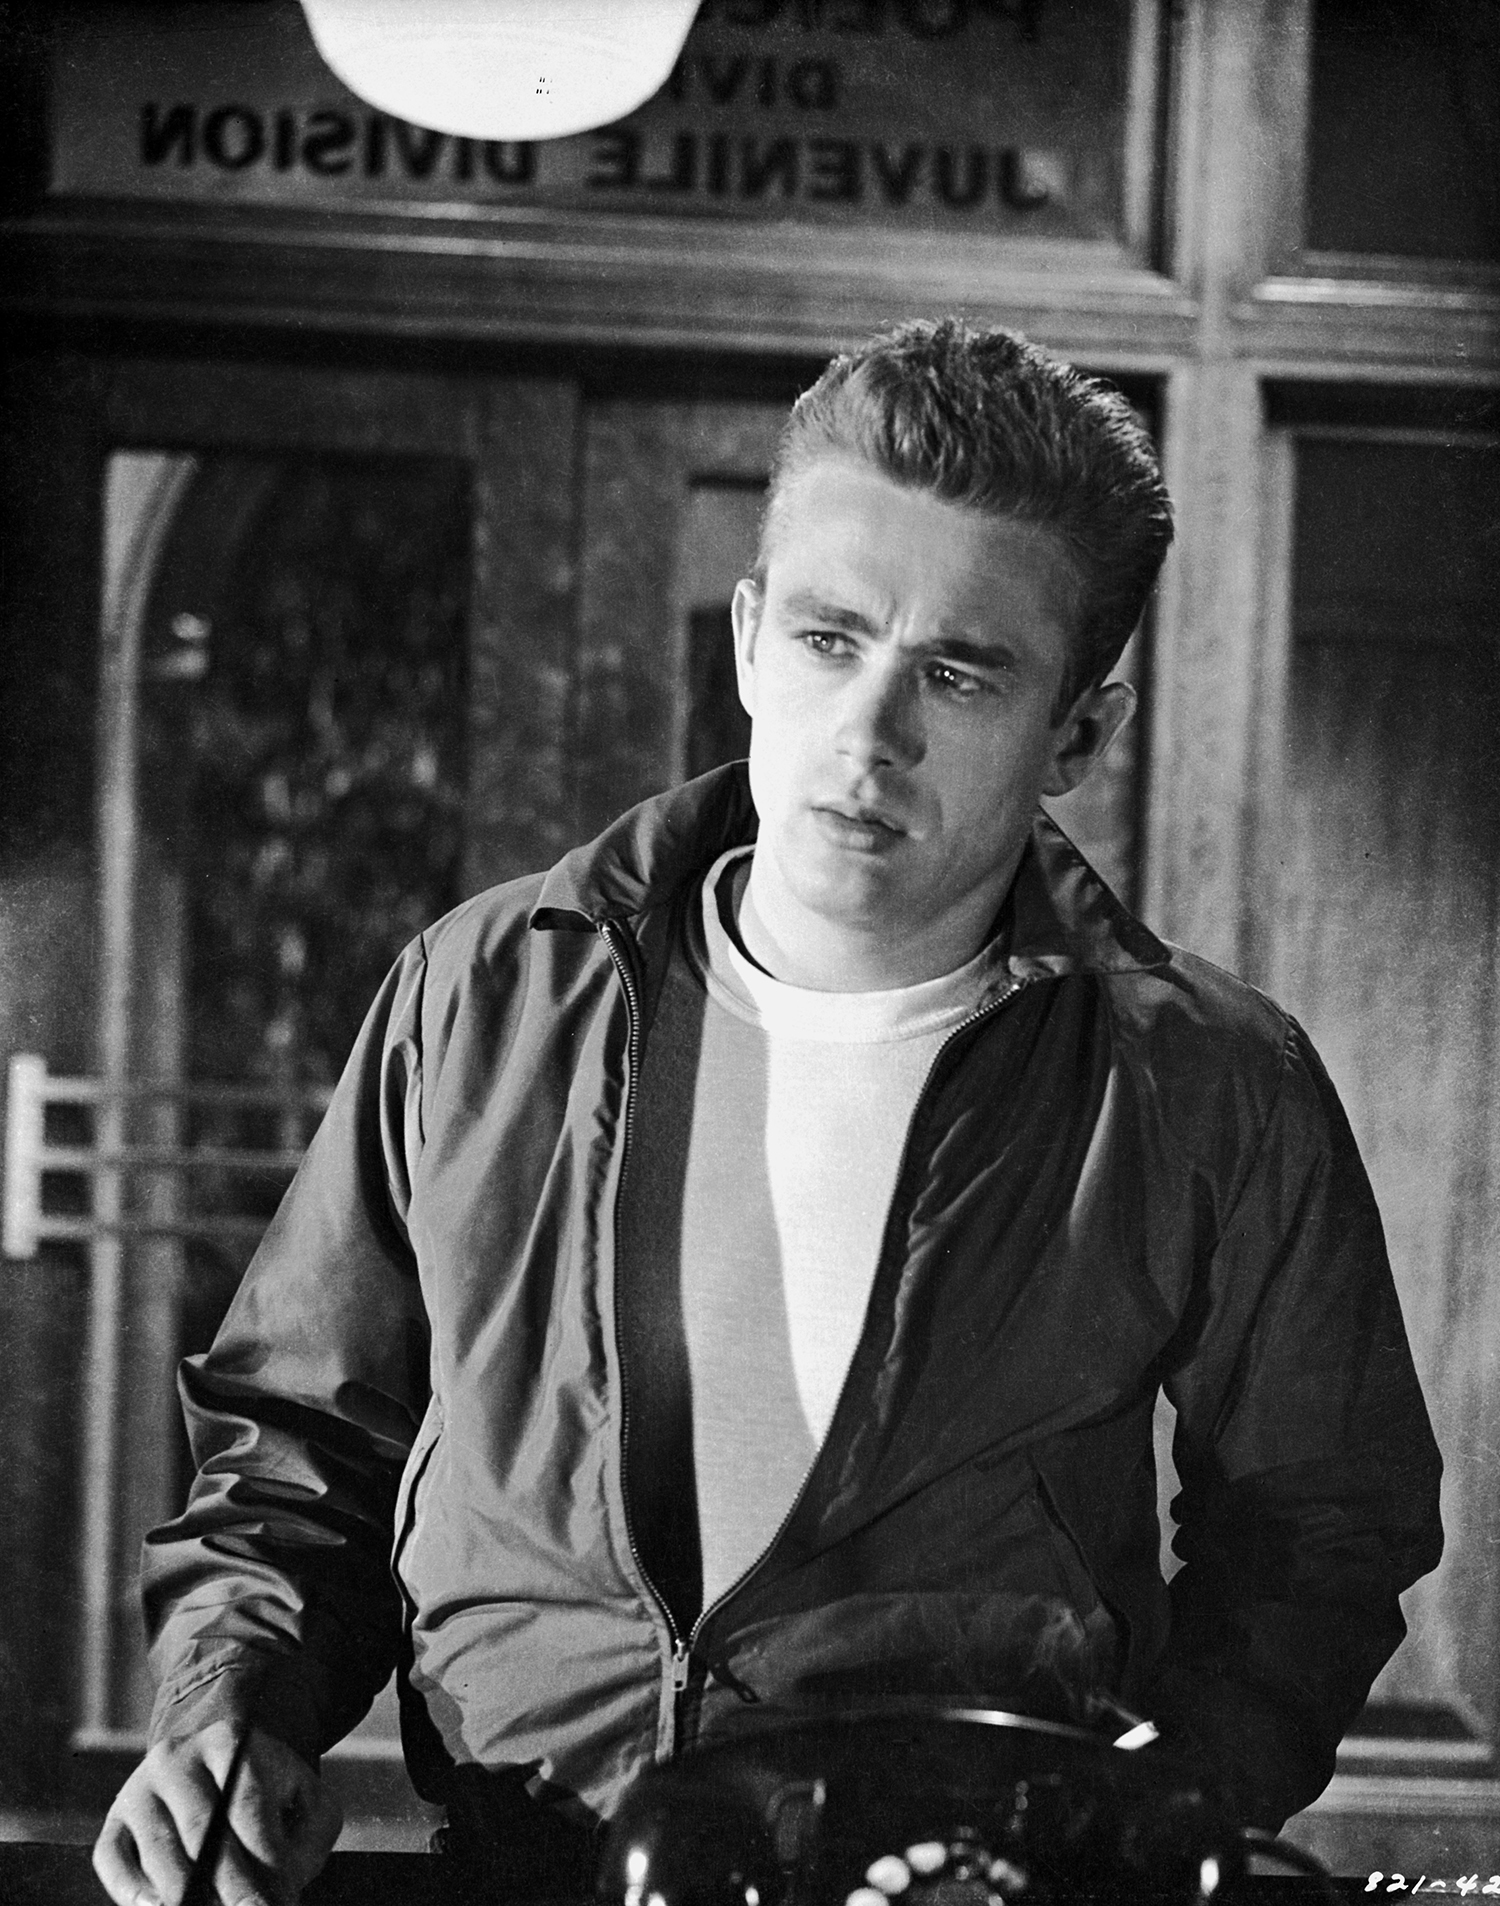 James Dean - Even the ultimate rebel had hair that never dissented, staying smoothly slicked back.